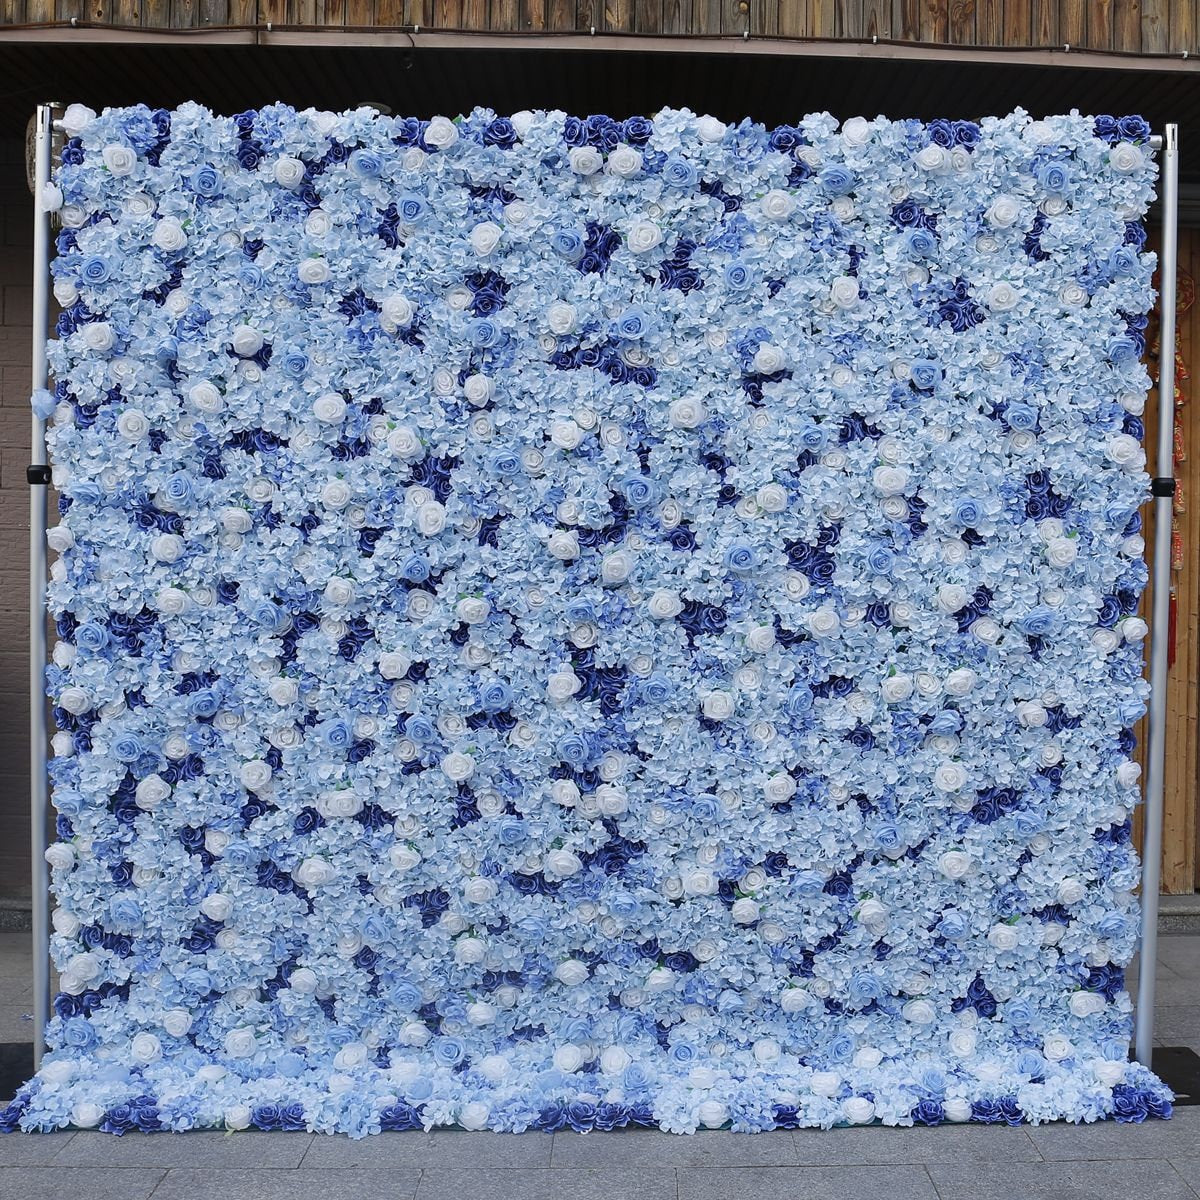 New Design Blue Floral Wall For Wedding Arrangement Event Salon Party Photography Backdrop Fabric Rolling Up Curtain Fabric Cloth